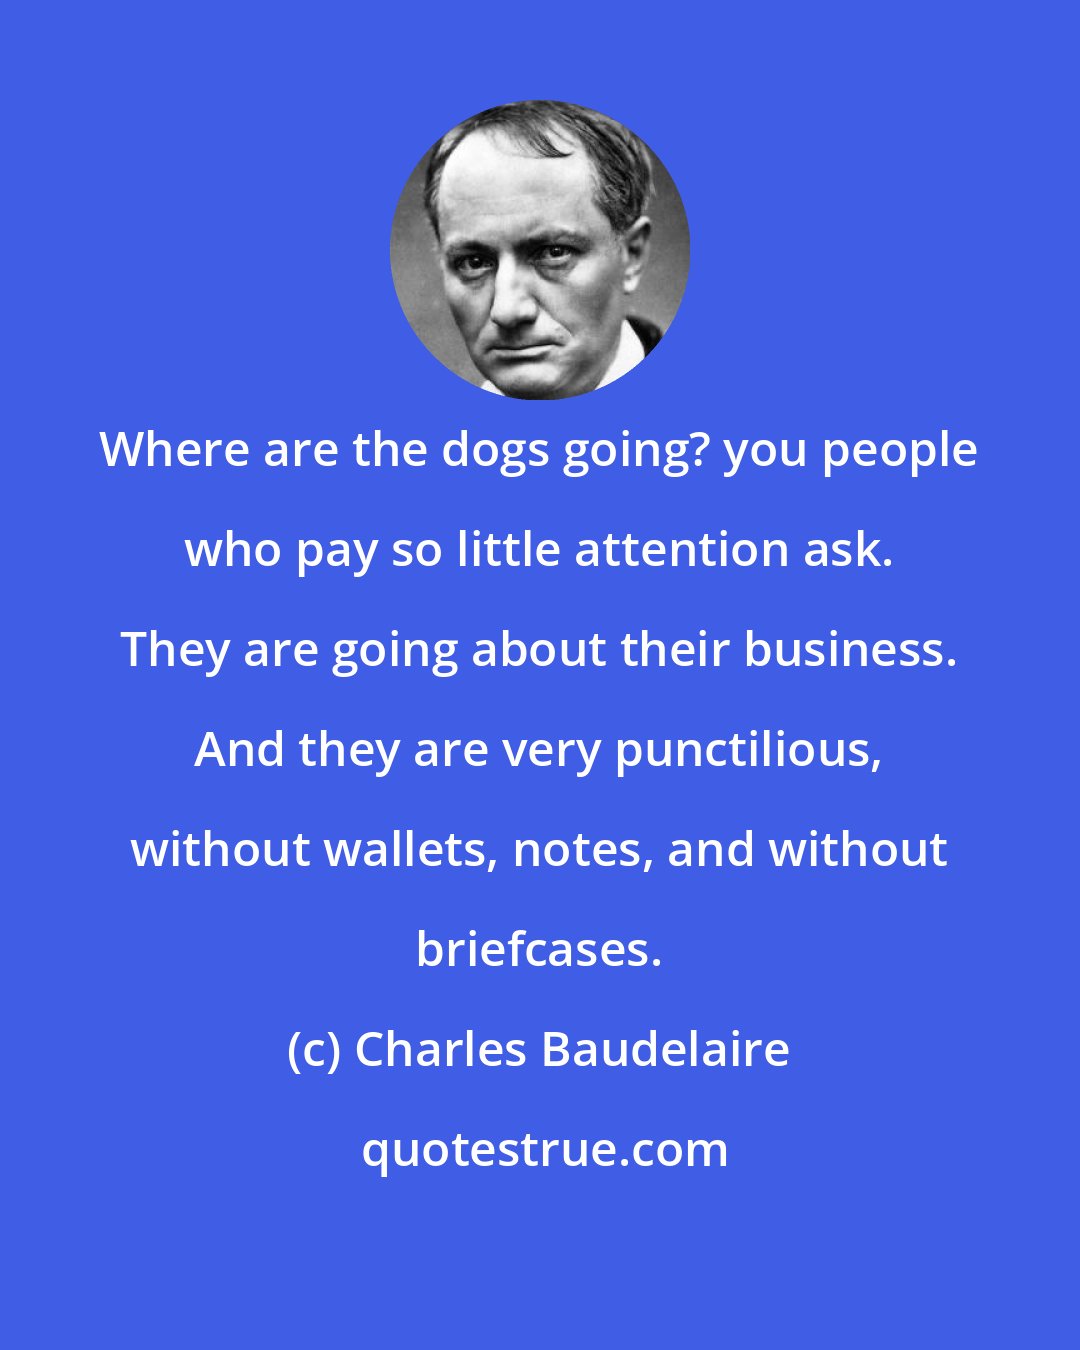 Charles Baudelaire: Where are the dogs going? you people who pay so little attention ask. They are going about their business. And they are very punctilious, without wallets, notes, and without briefcases.